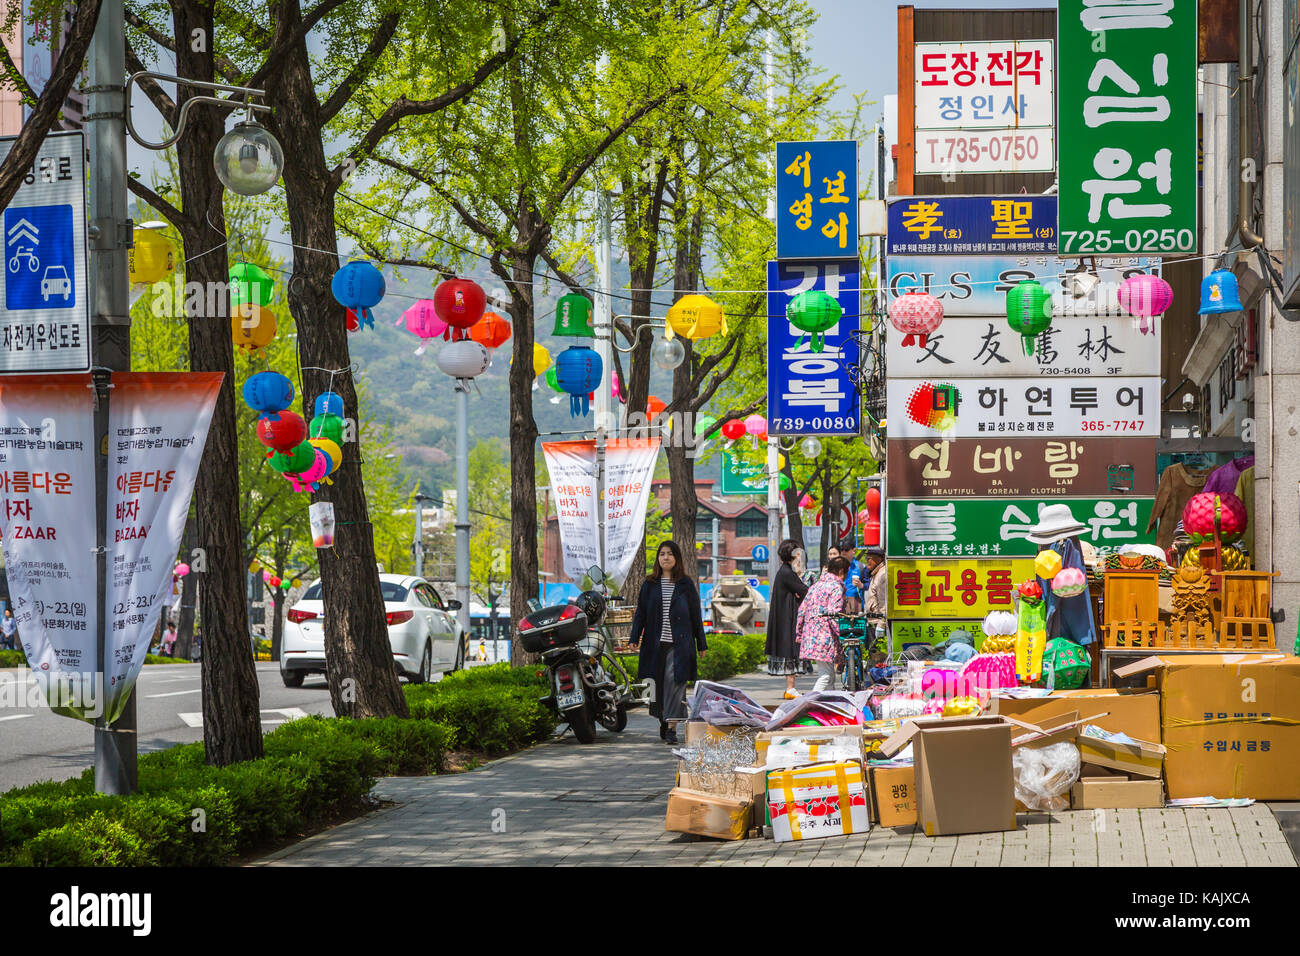 A storefront along Insadong-gil street in the Insadong district of Seoul, south Korea, Asia. Stock Photo